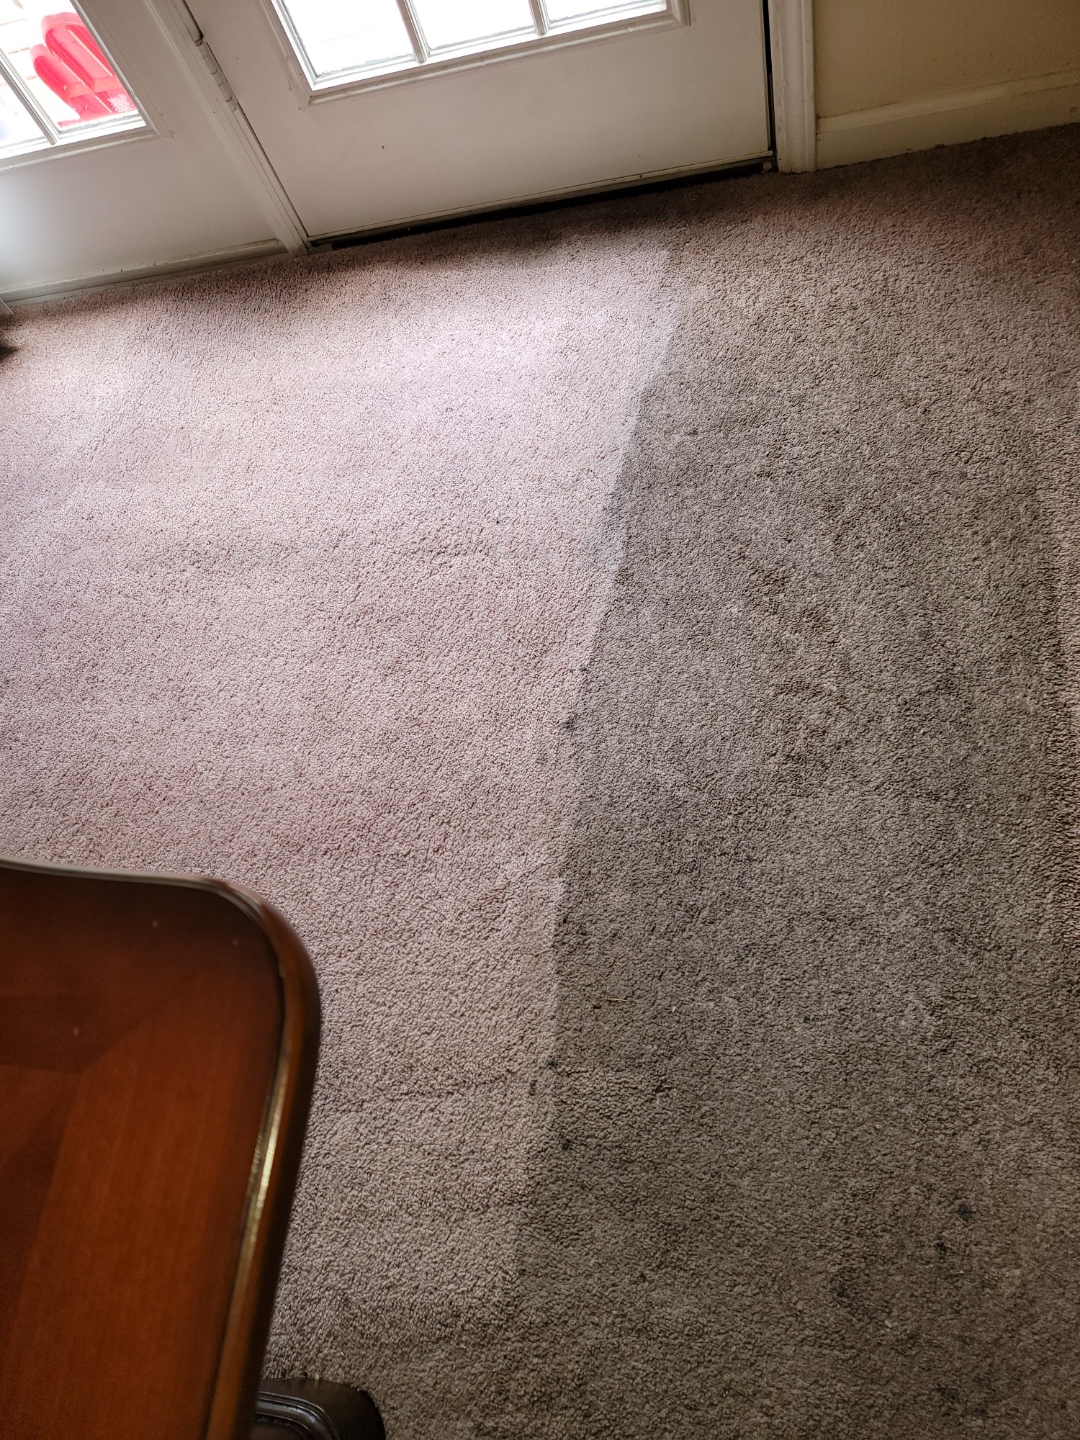 Carpet Cleaning Service Grayson